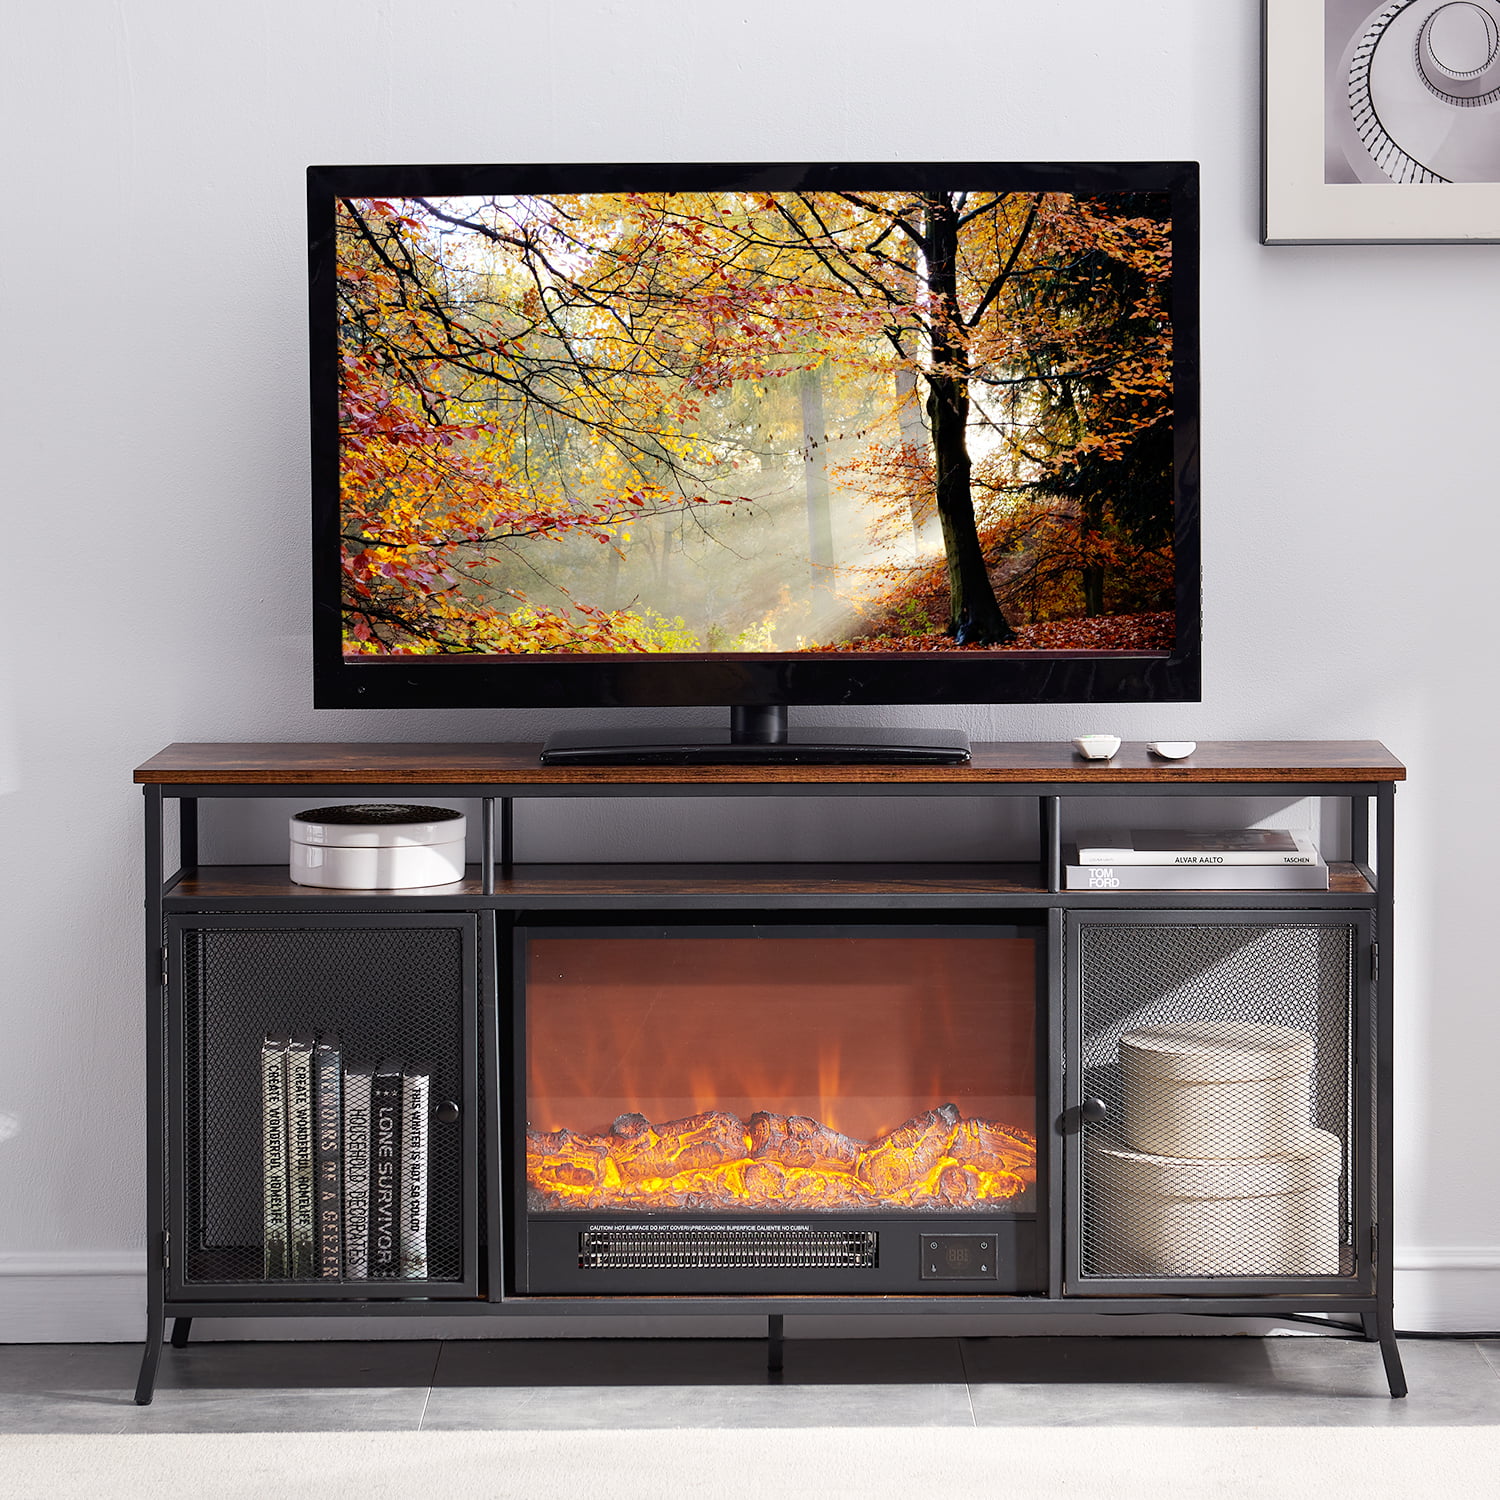 60 Inch Electric Fireplace Tv Stand, Schuyler Tv Stand For Tvs Up To 60 Inches With Electric Fireplace Included